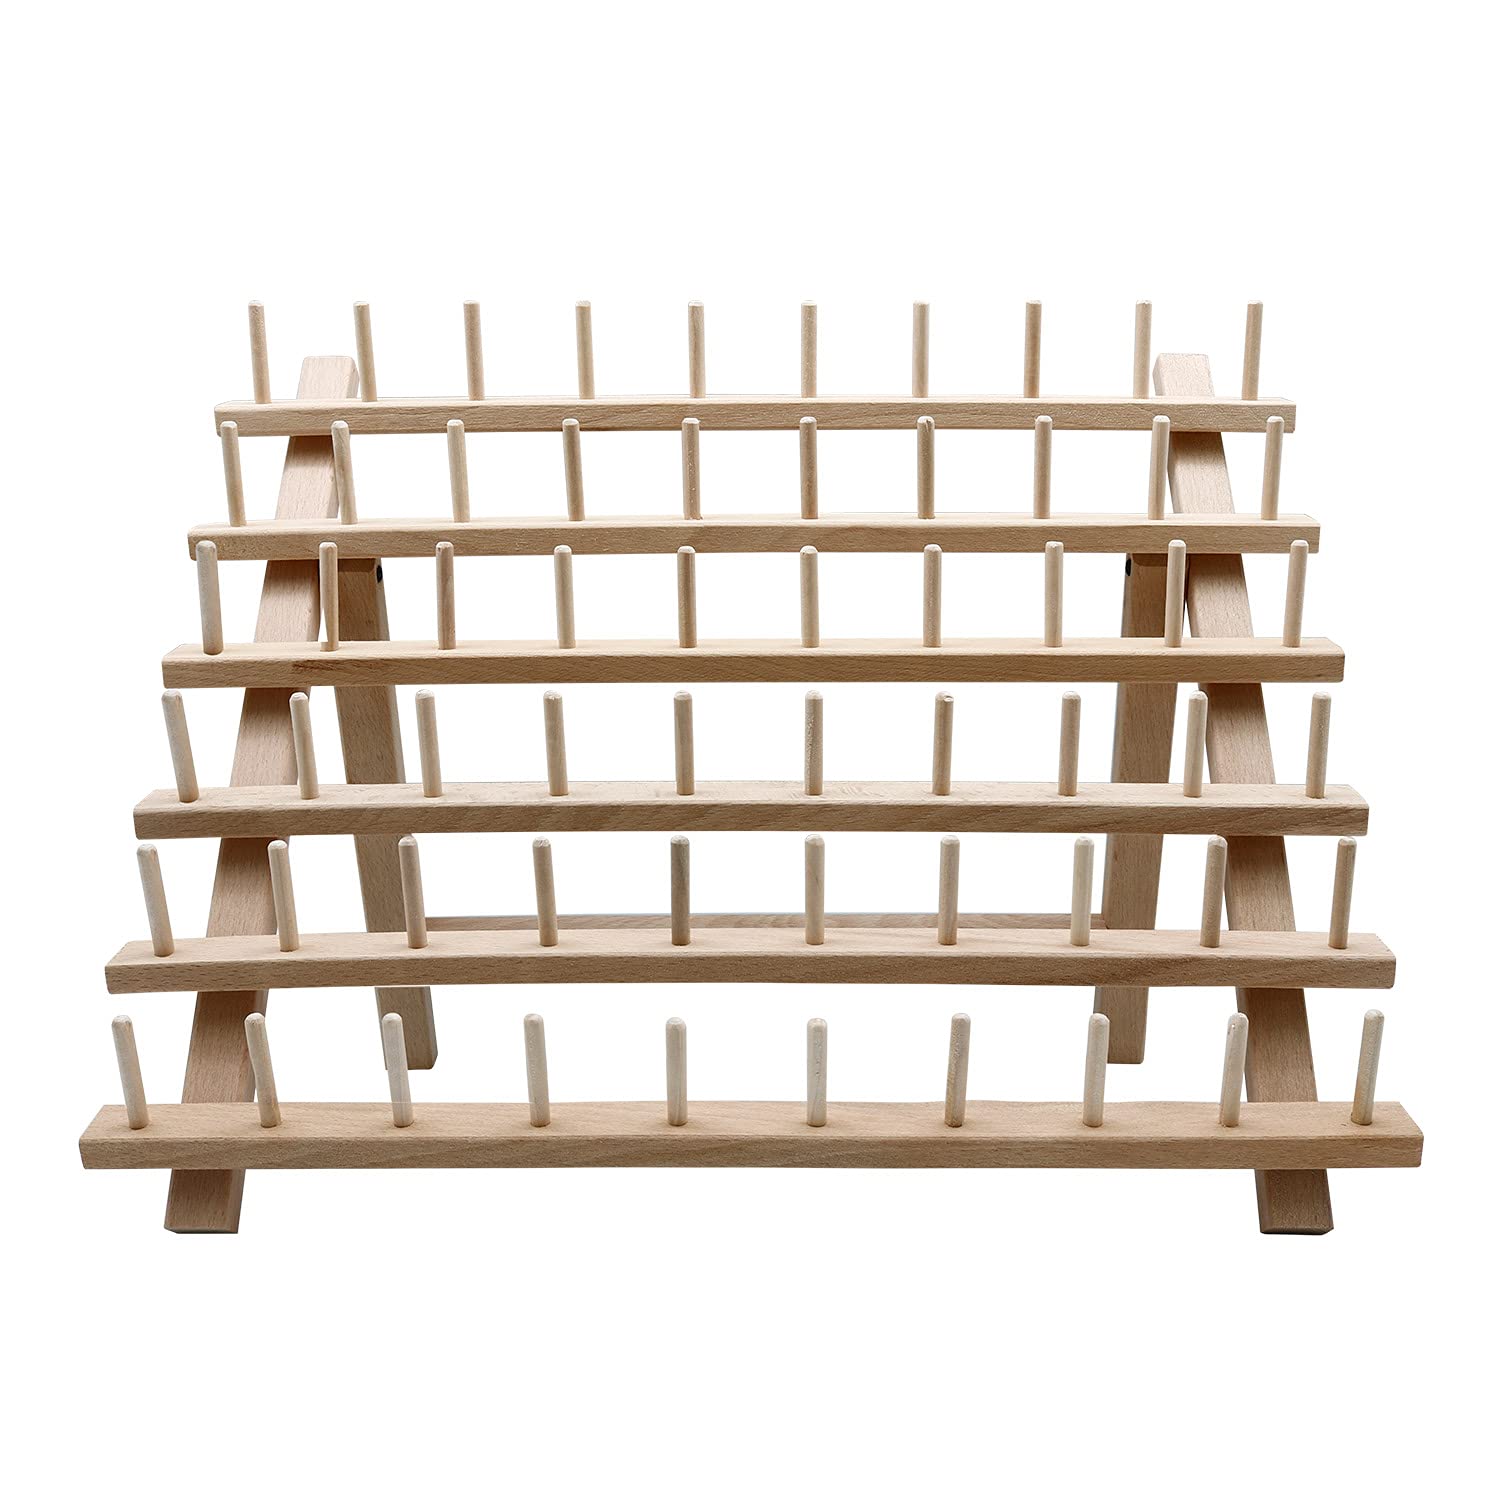 STUDIO LIMITED Braiding Hair Rack, 60 Spool Wooden Braiding Hair Holder, Thread Rack for Sewing, Quilting, Embroidery, Hanging Accessories Find Your New Look Today!